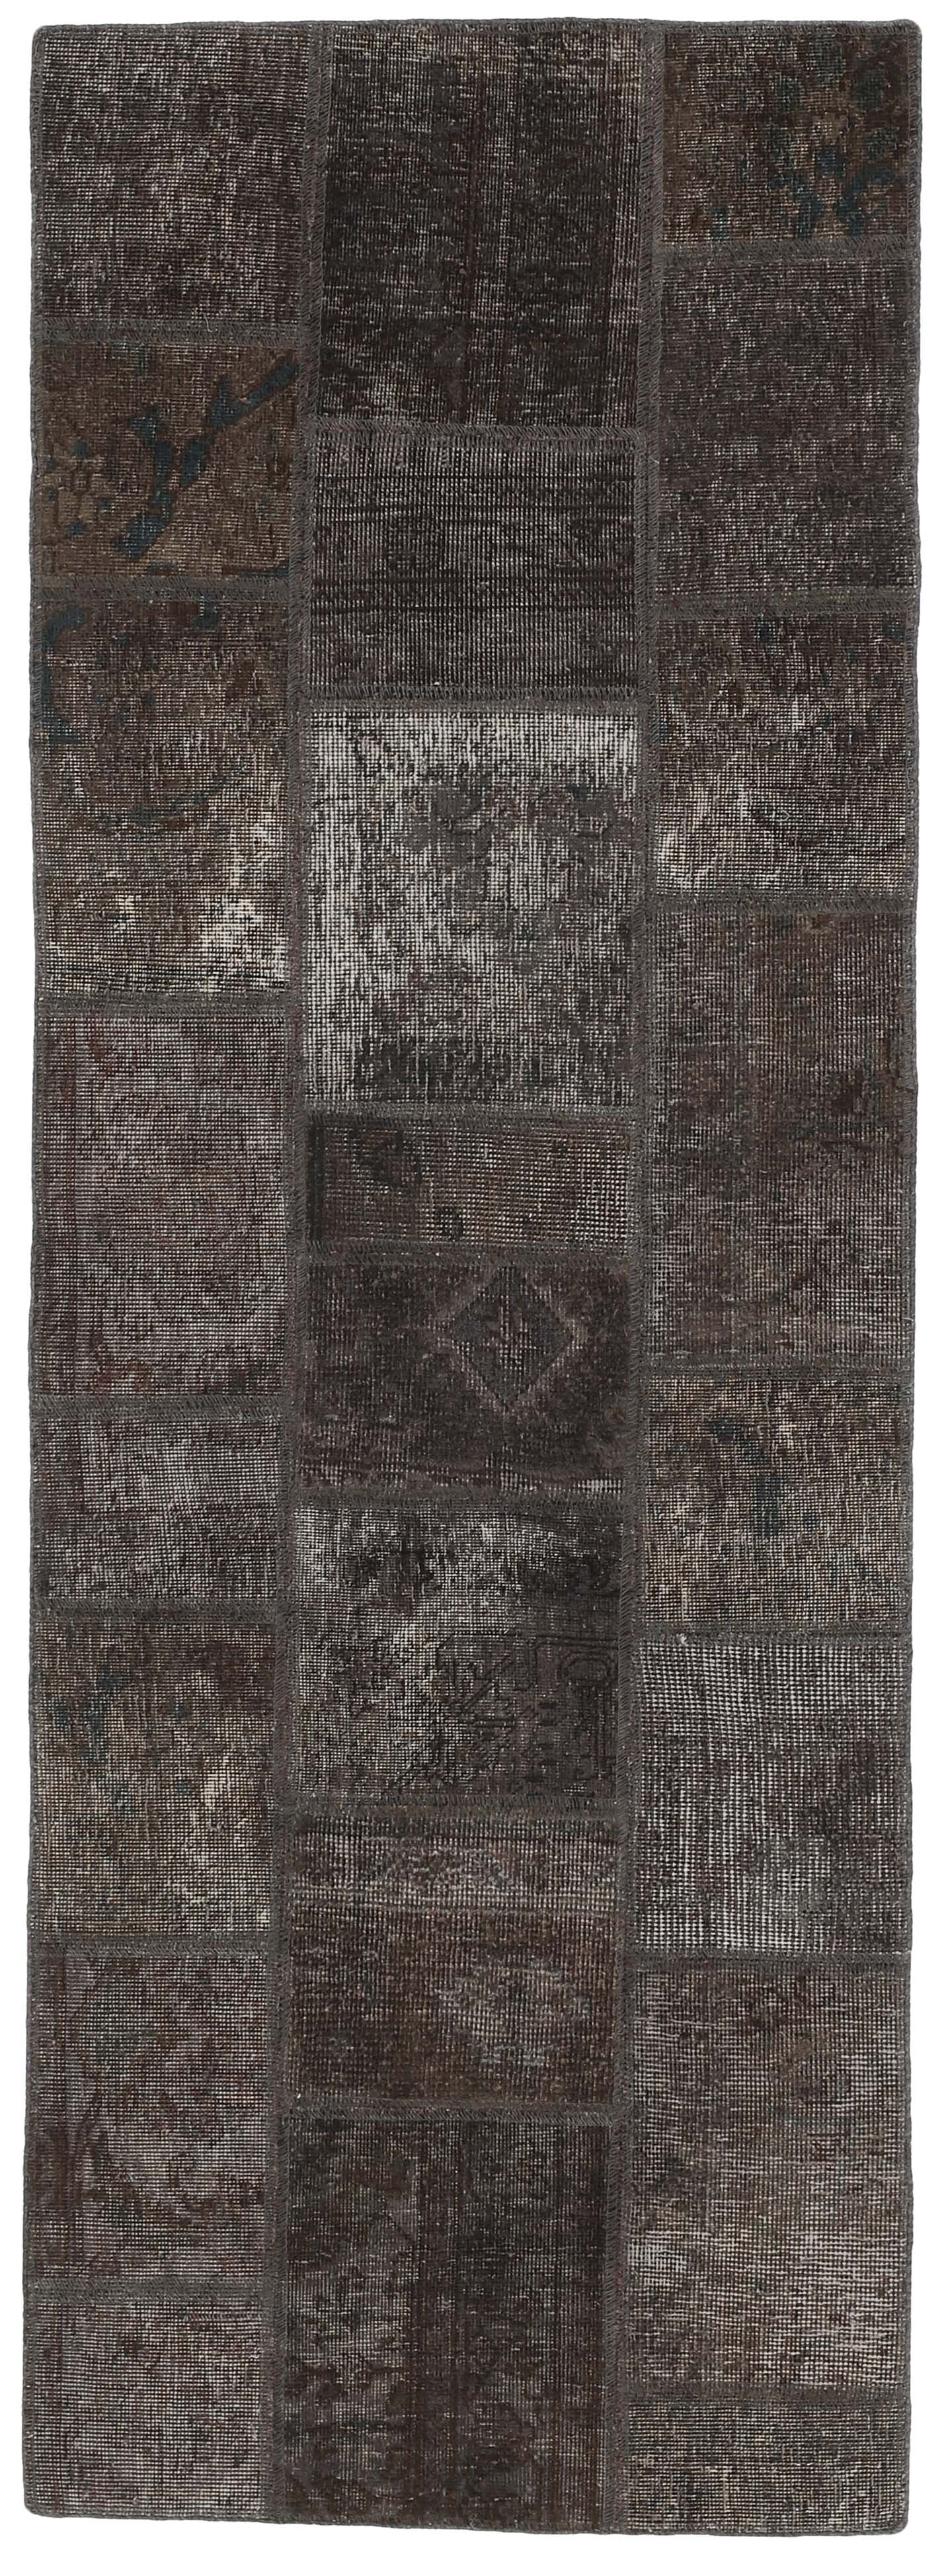 Authentic brown patchwork persian runner